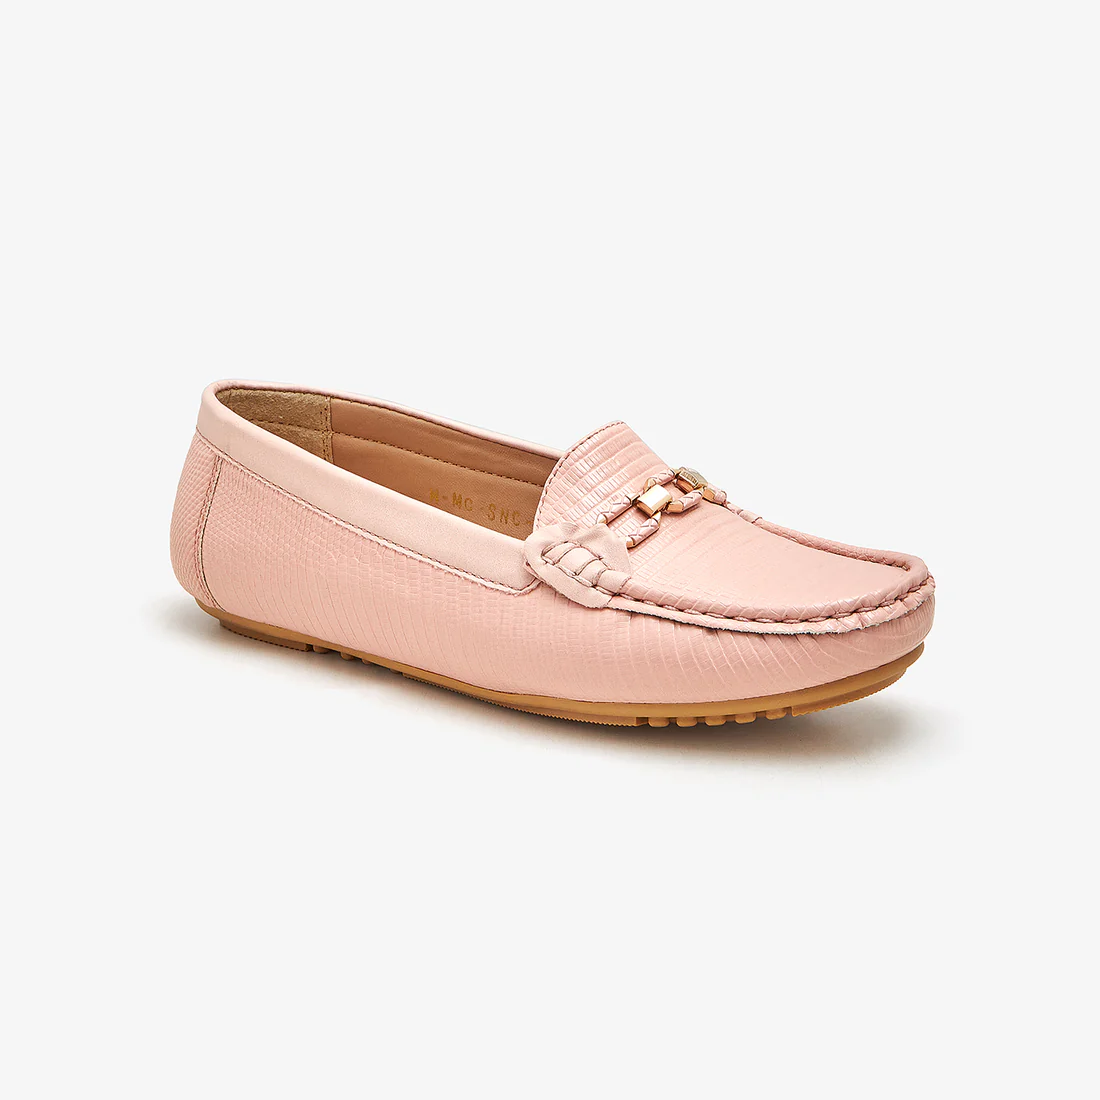 Women Comfy Loafers